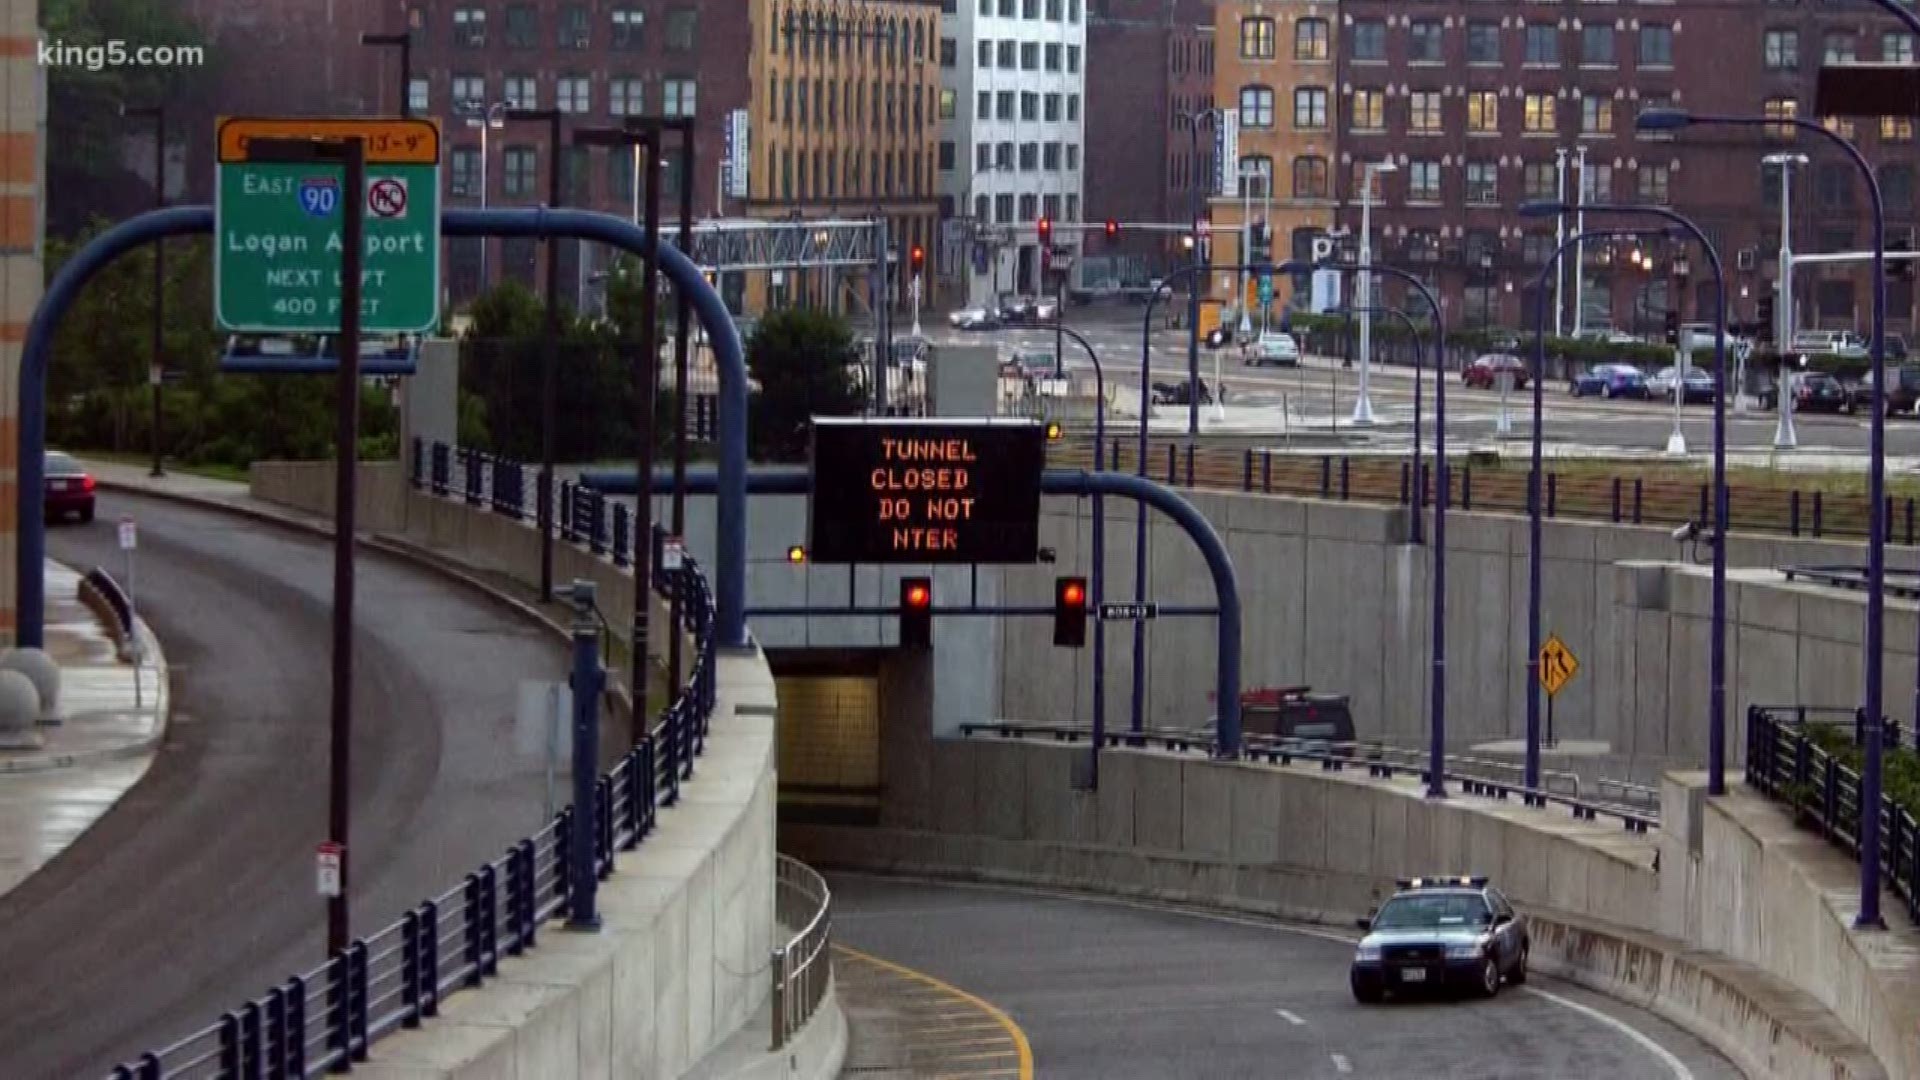 Despite delays and cost overruns, transportation and infrastructure experts say Seattle has avoided the problems that plagued Boston’s Big Dig.  The next challenge for WSDOT is avoiding the problems Boston faced after their tunnels opened. KING 5's Amanda Grace reports